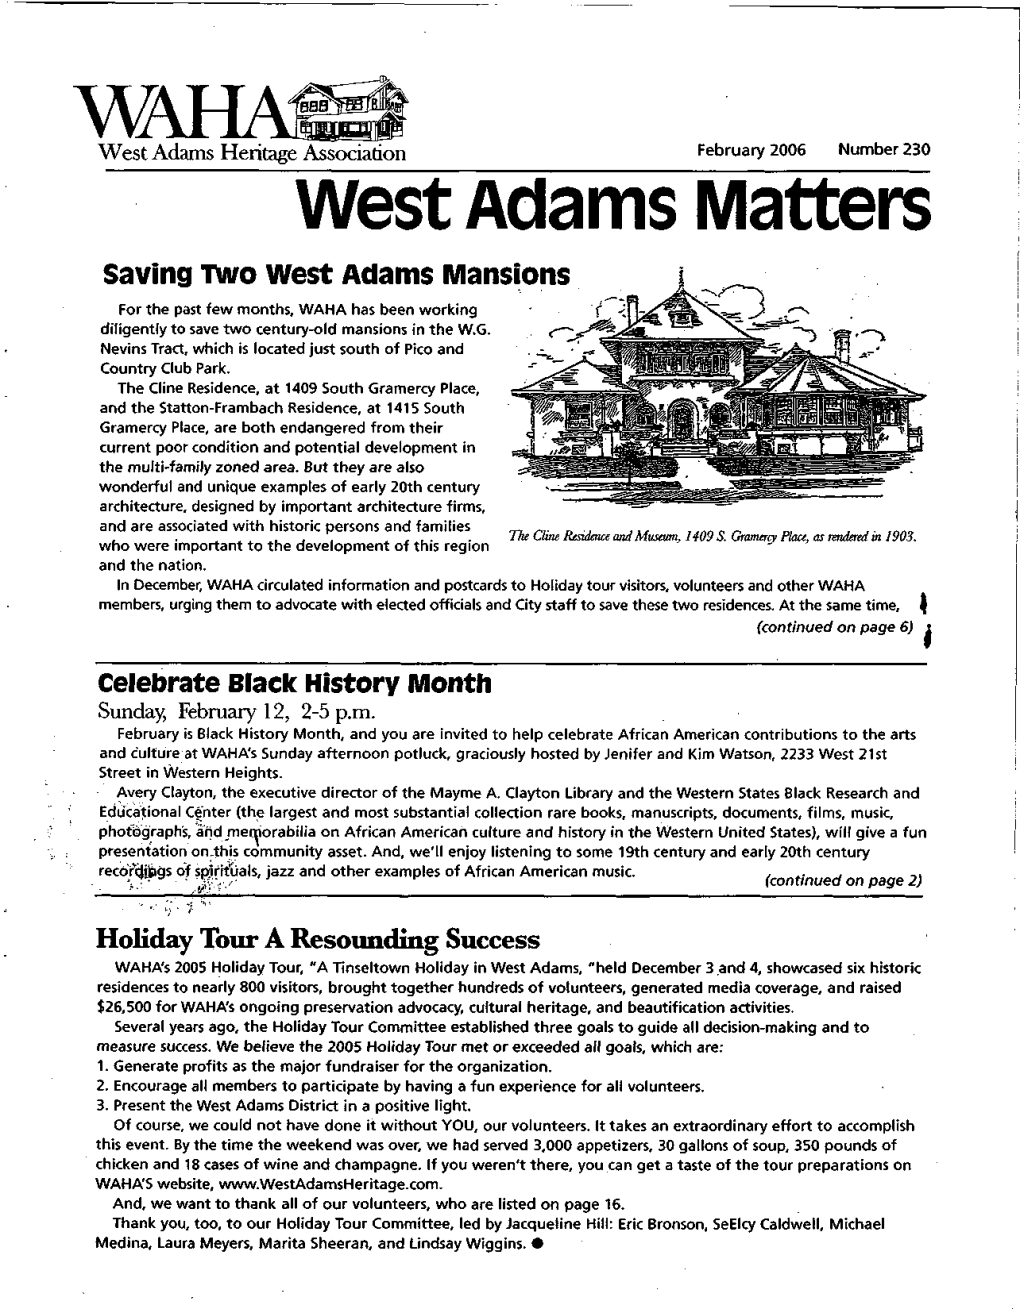 West Adams Matters Saving Two West Adams Mansions for the Past Few Months, WAHA Has Been Working Diligently to Save Two Century-Old Mansions in the W.G